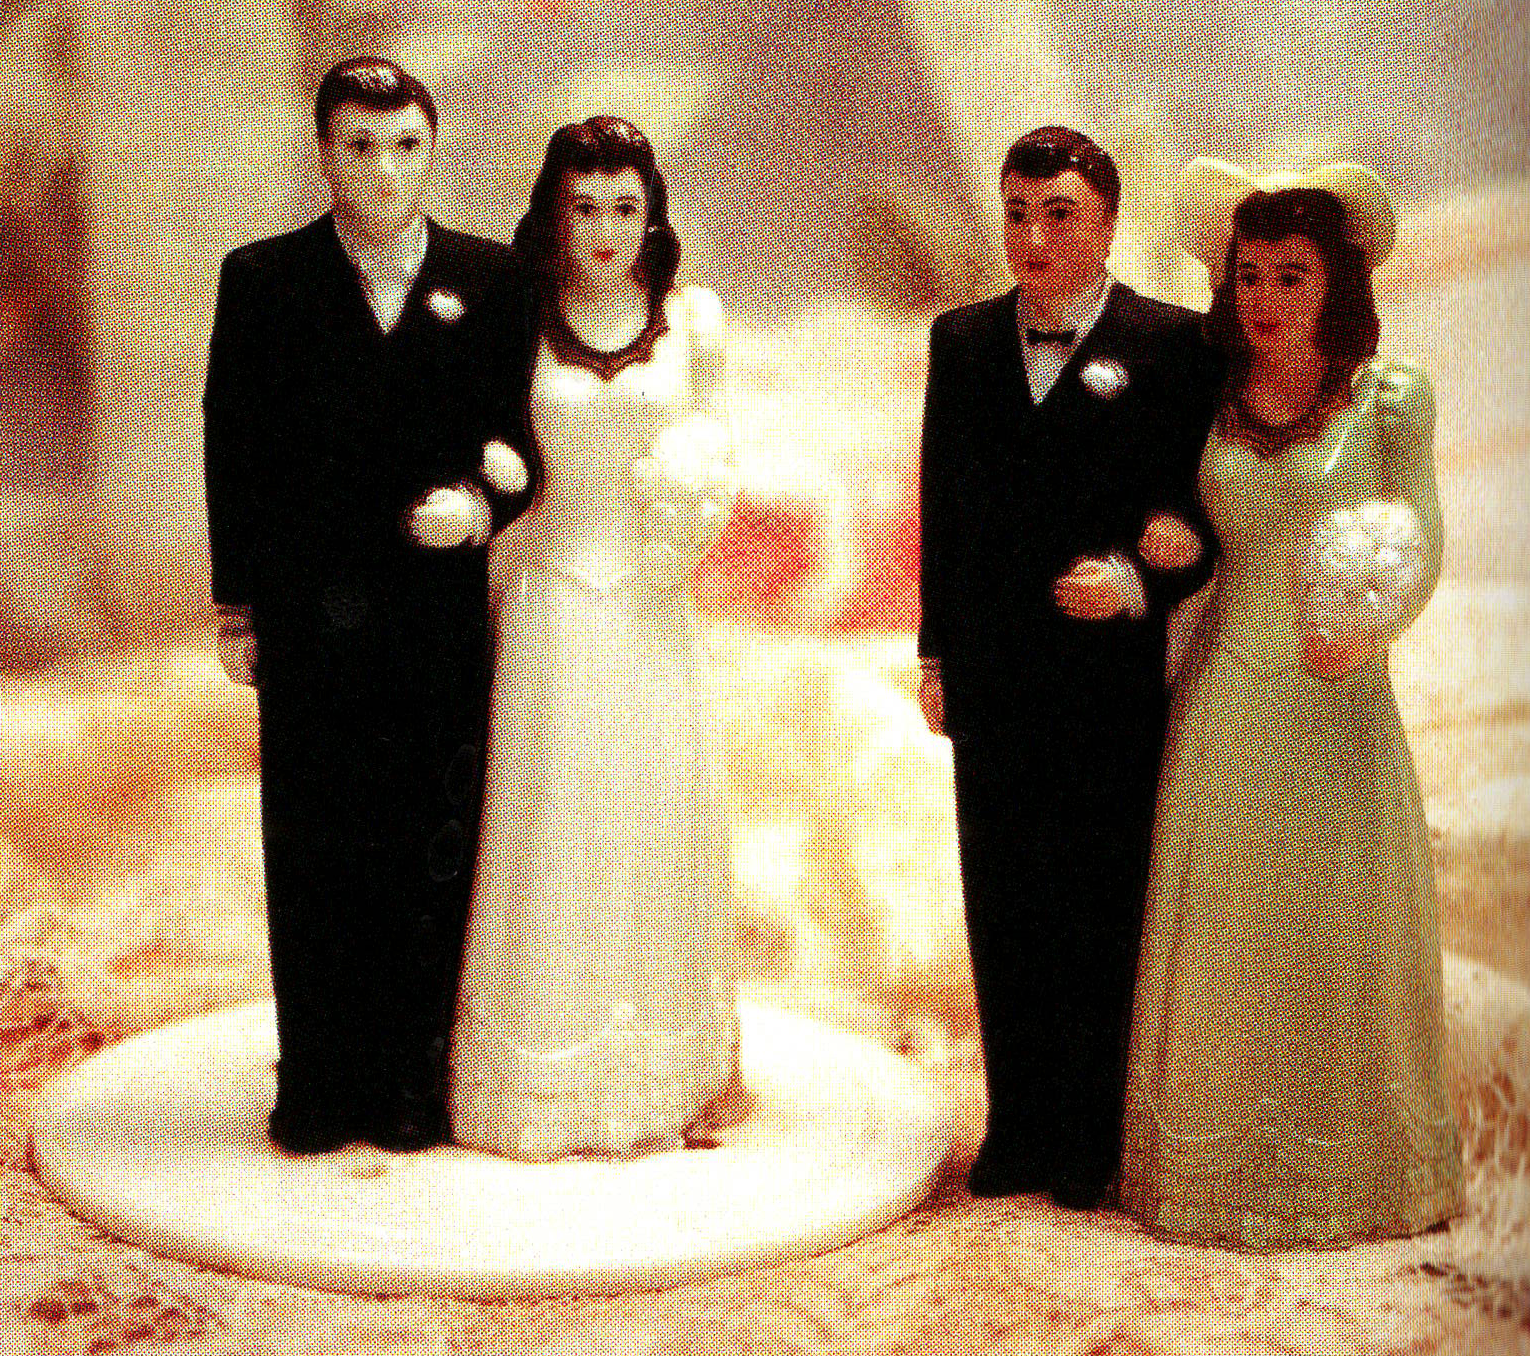 Two identical sets of bride and groom with painted variations in skin and clothing color.